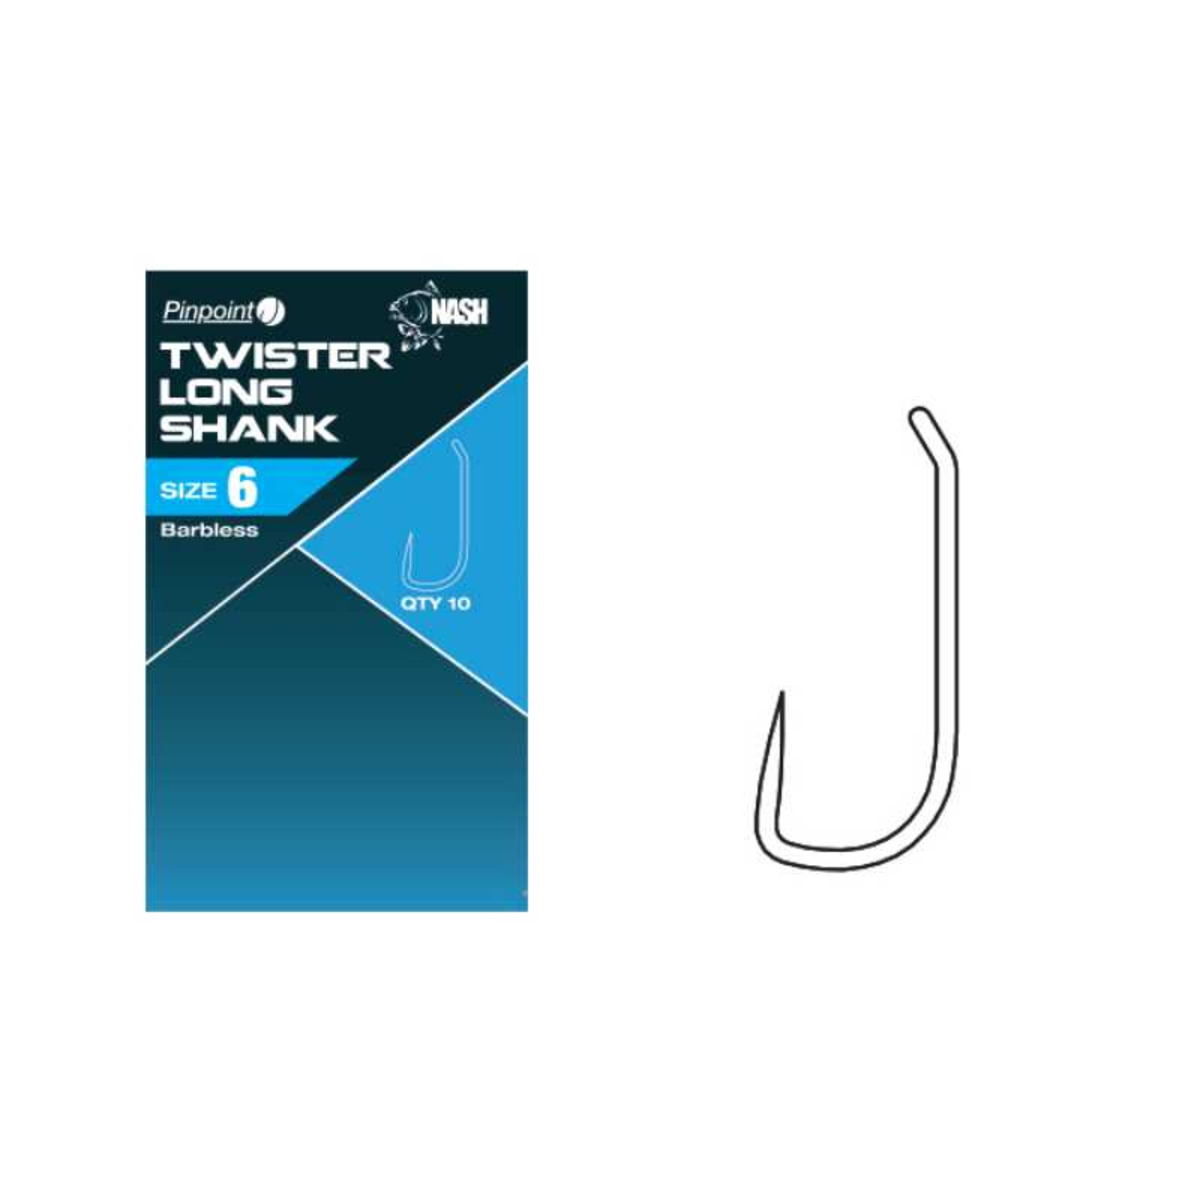 Nash Twister Long Shank - Size 6 Barbless